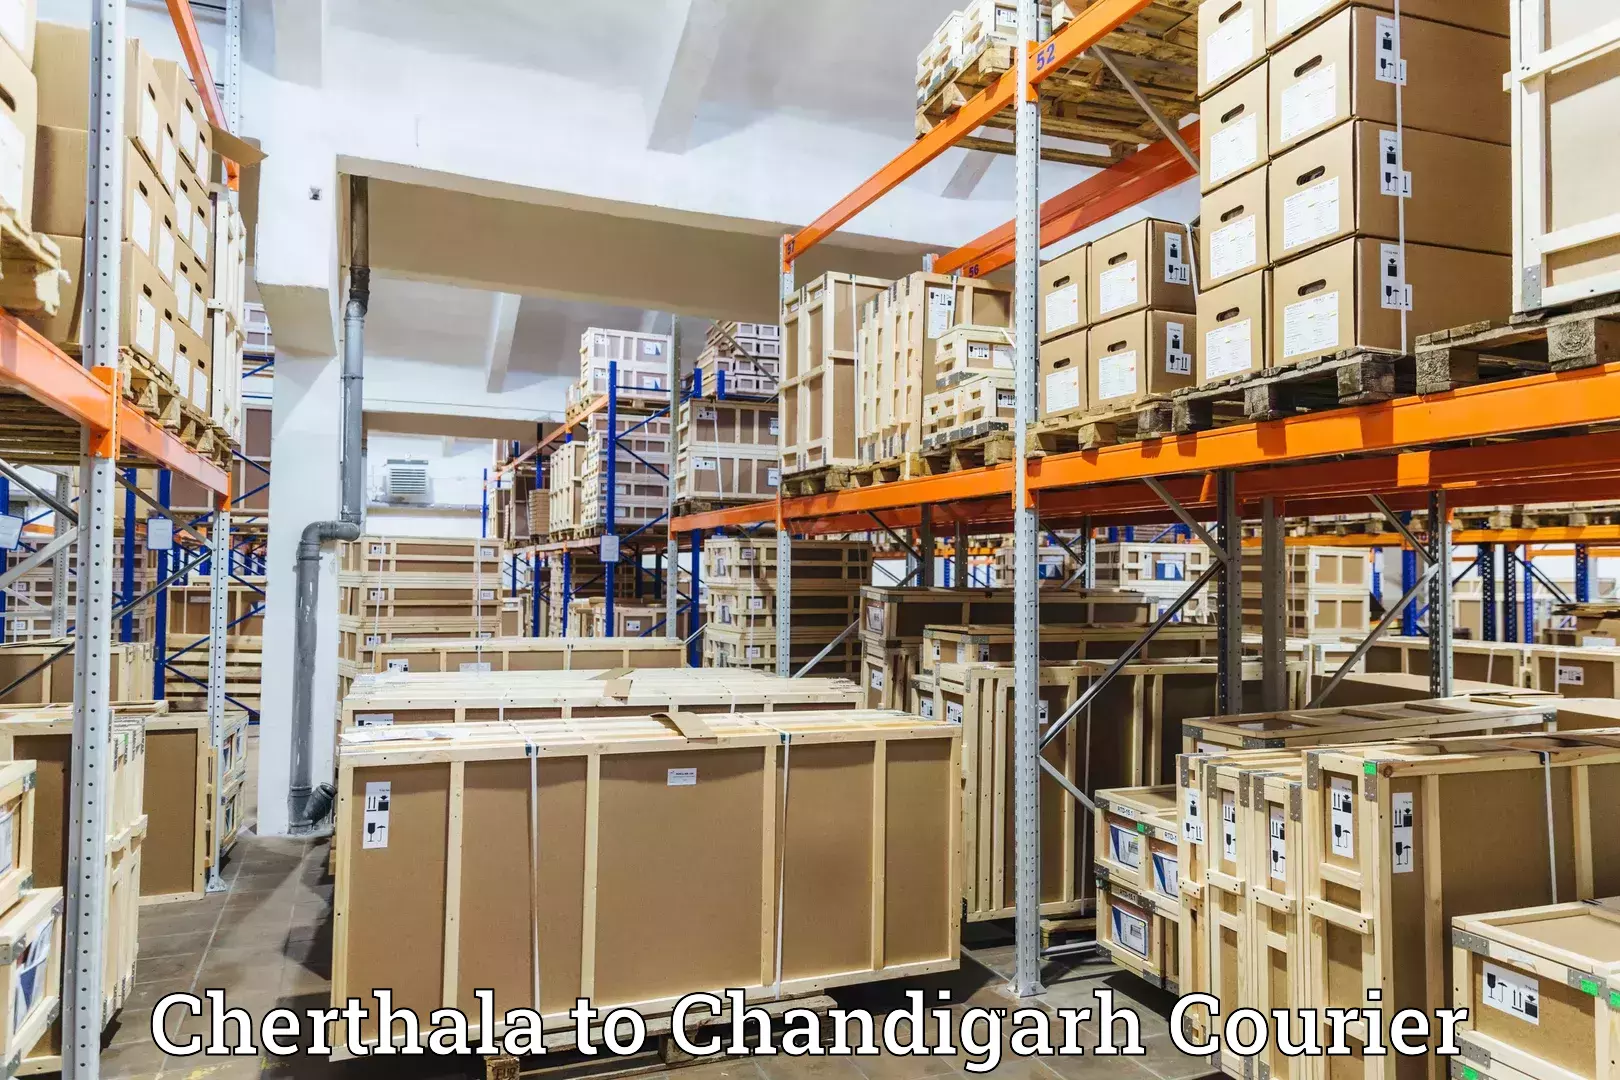 Courier service booking Cherthala to Chandigarh